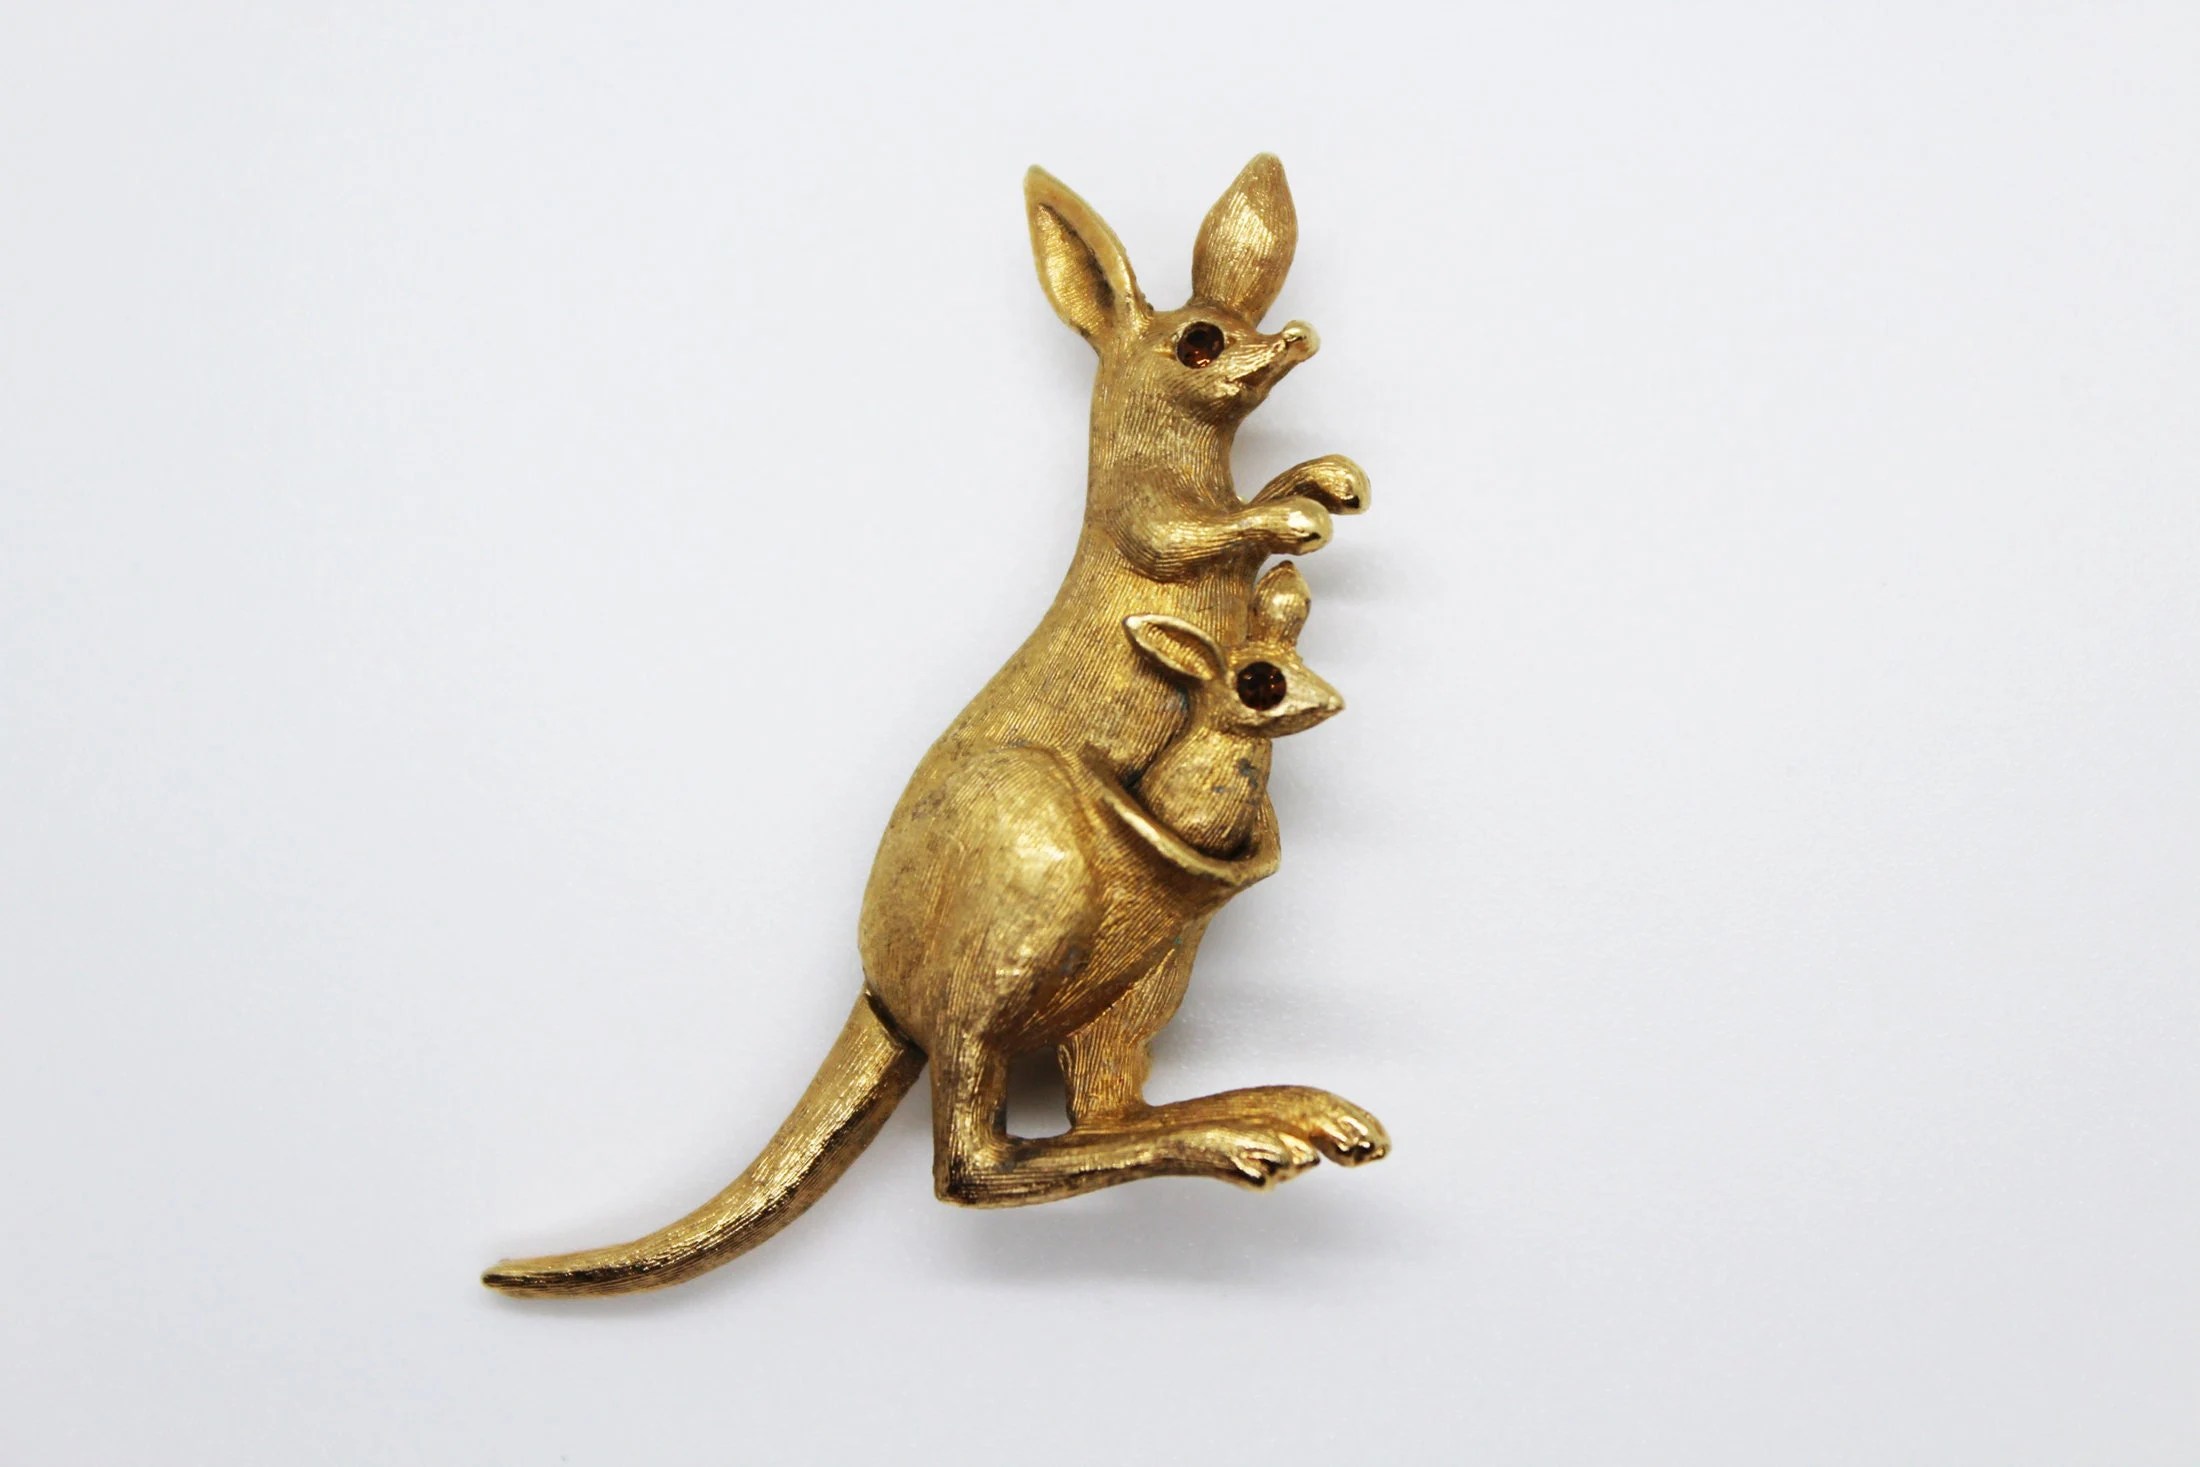 Avon Signed Articulated Kangaroo with Joey Brooch Pin – Vintage Retro Animal Lovers 1970s Gold Tone Boho Collectible Costume Jewelry